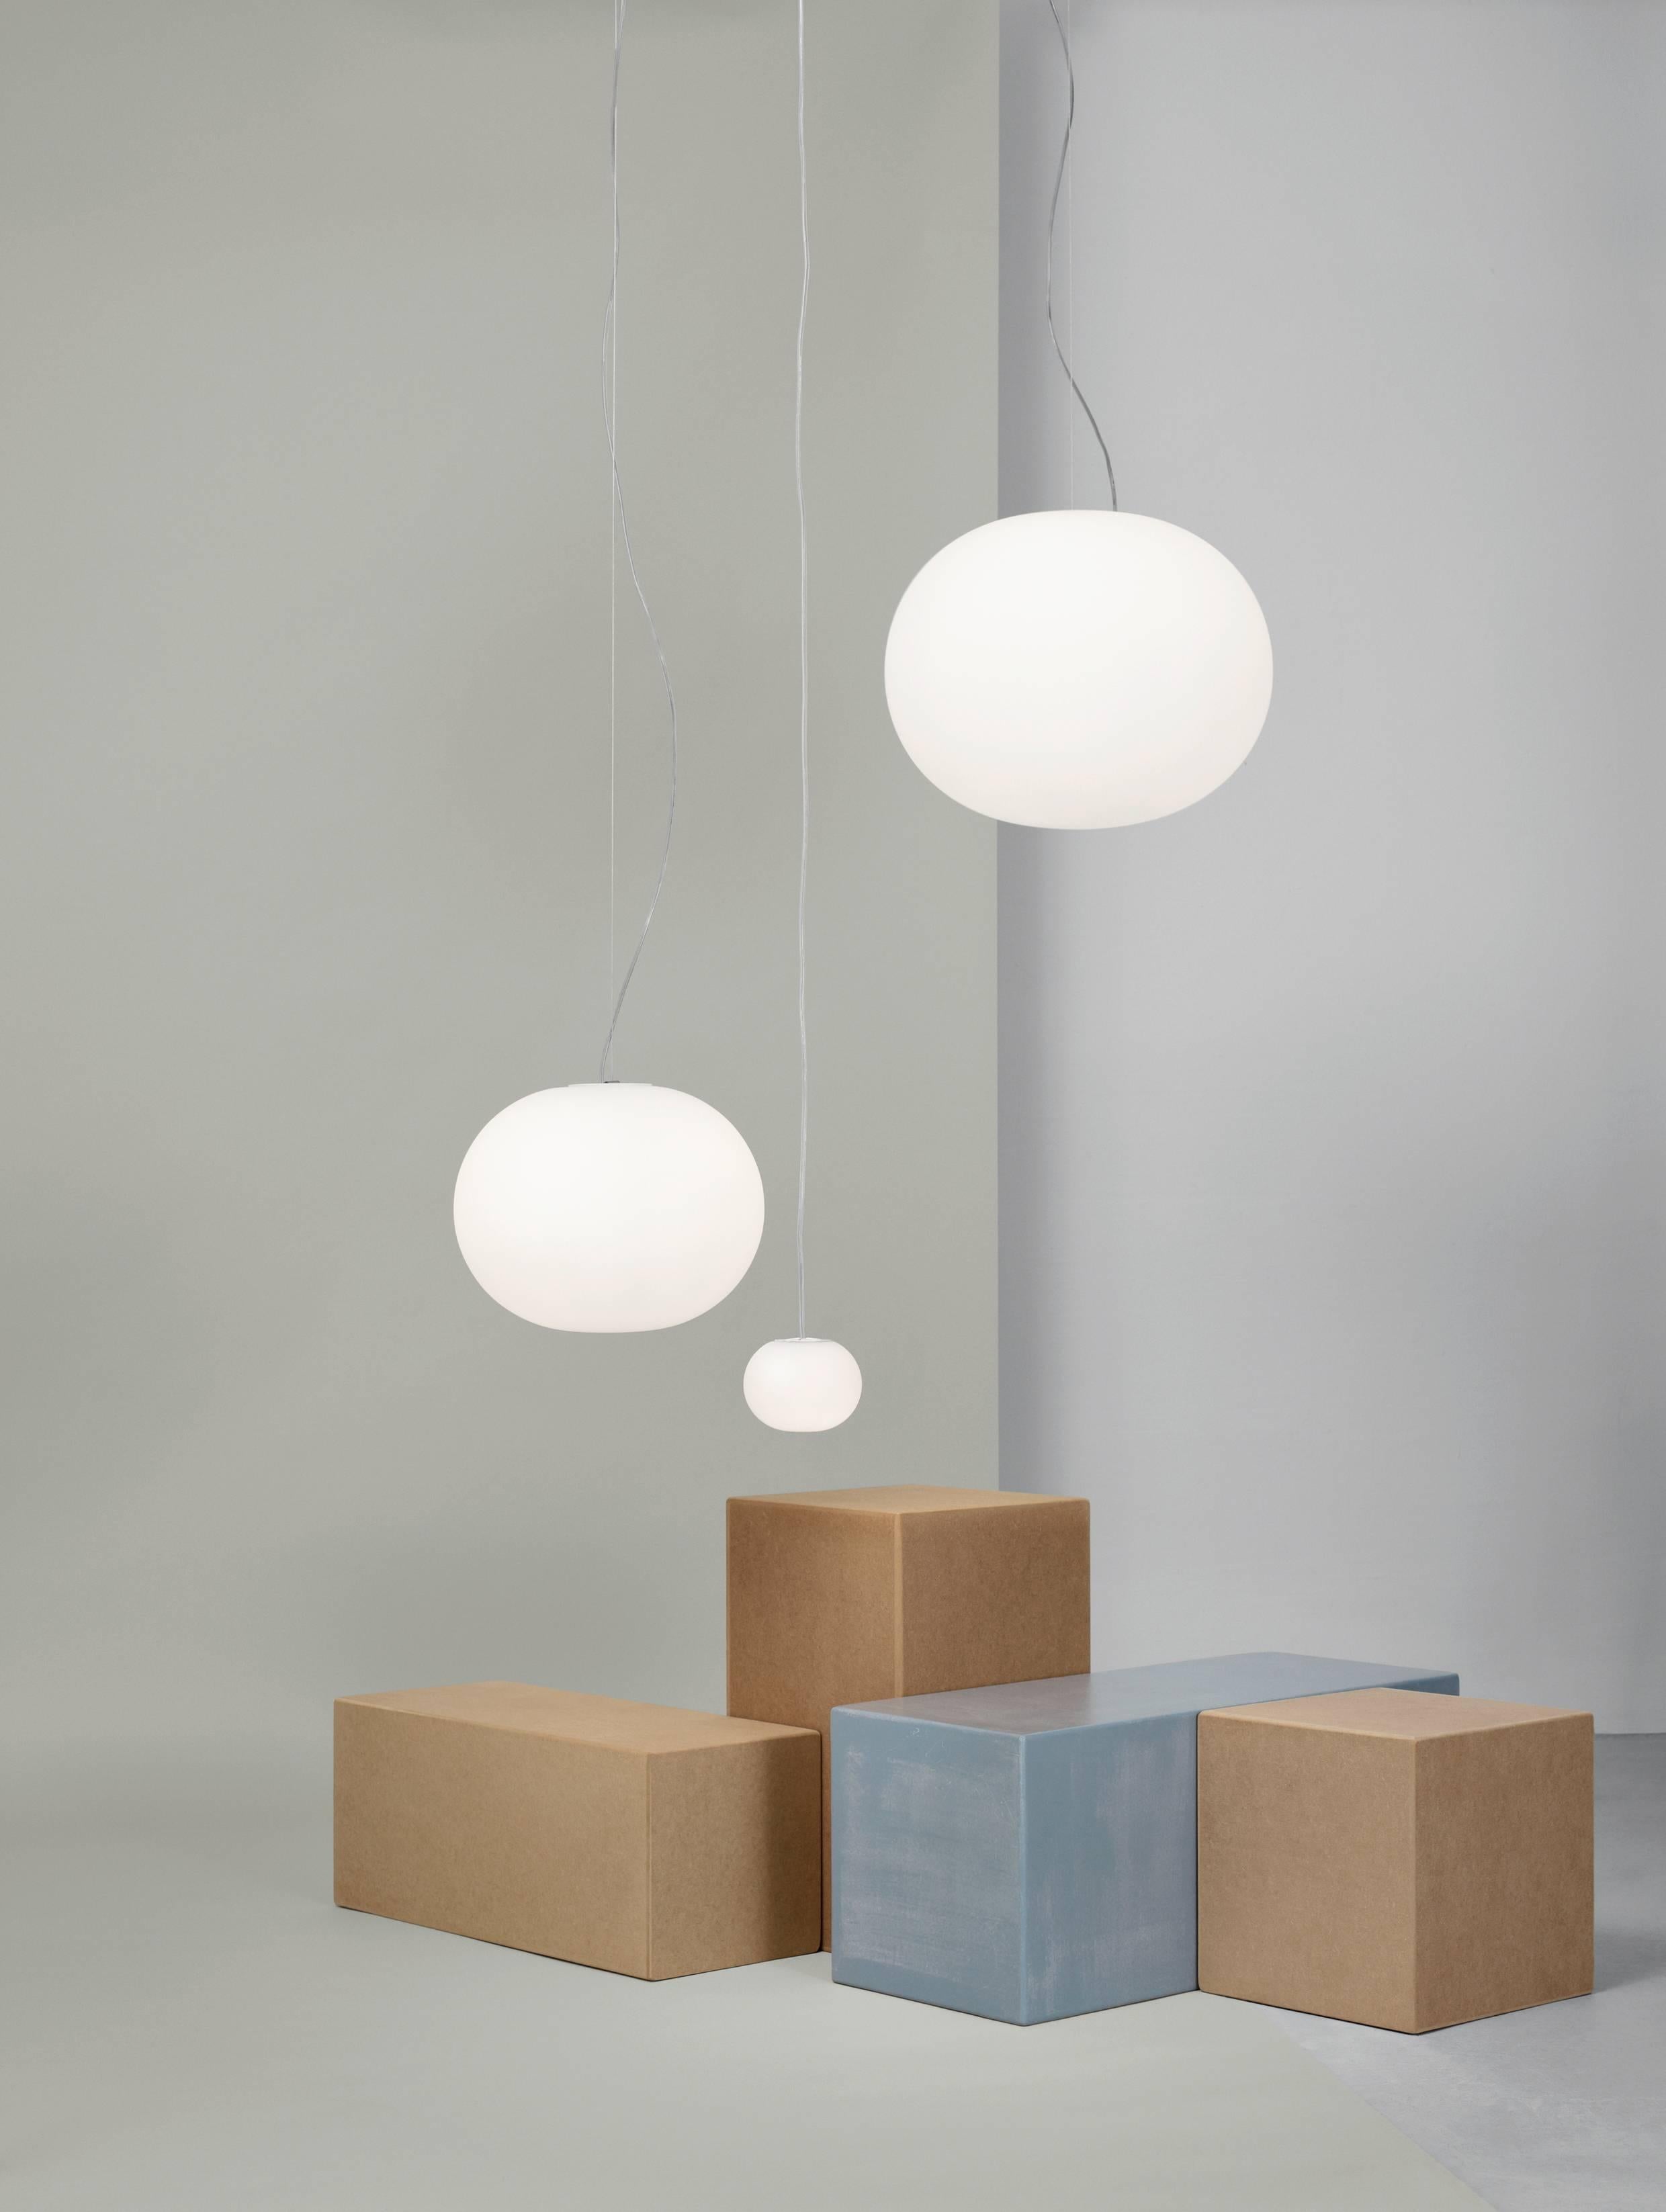 FLOS Glo-Ball S1 Fluorescent Pendant Light by Jasper Morrison
Marrying the functional with the otherworldly, the Glo-Ball S by Jasper Morrison is a remarkably versatile design that punctuates any room it is featured in. Its diffuser is made of